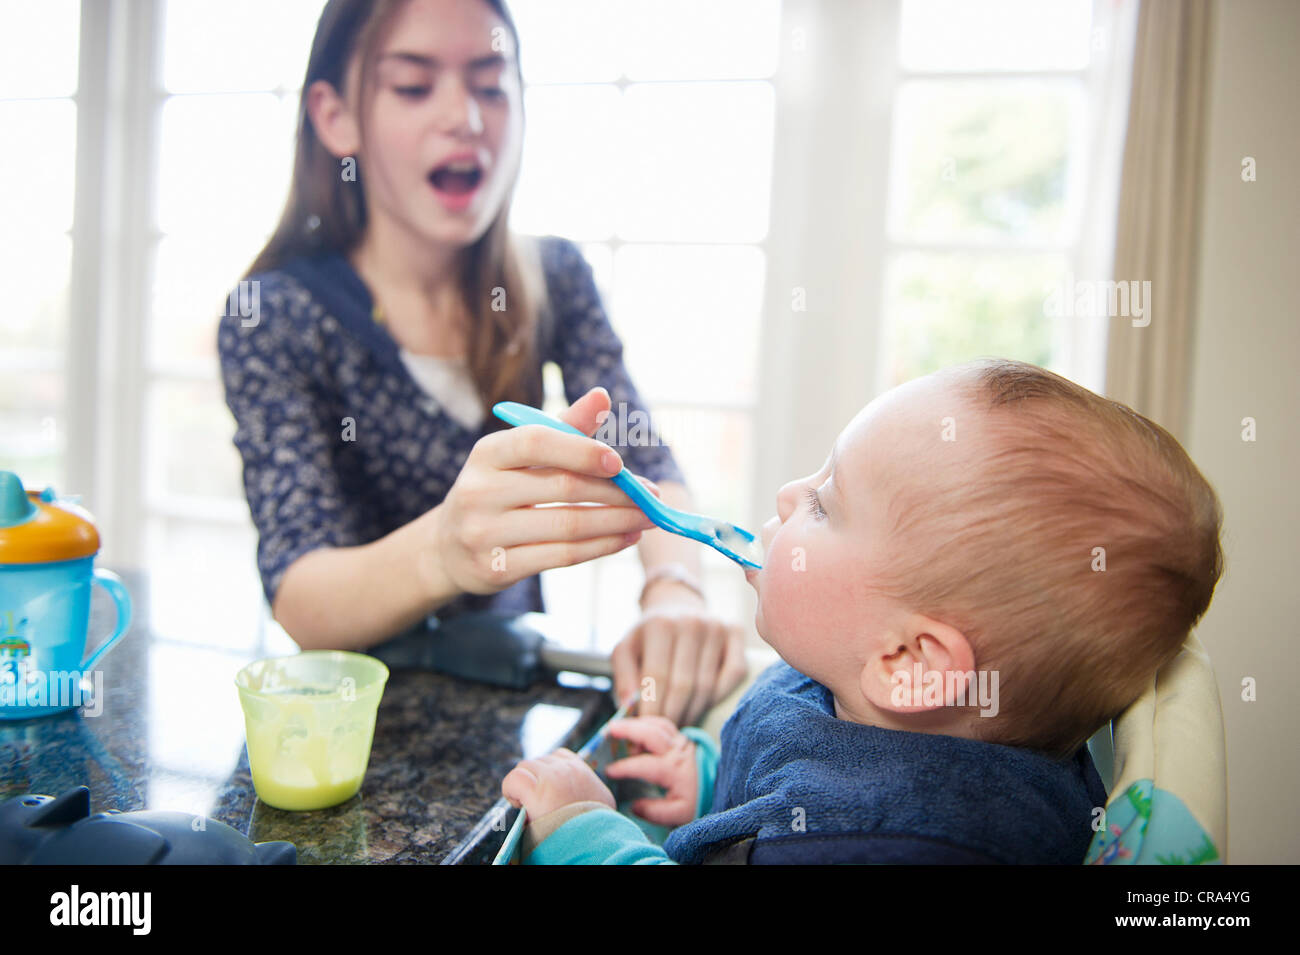 Girl feeding baby brother at table Stock Photo